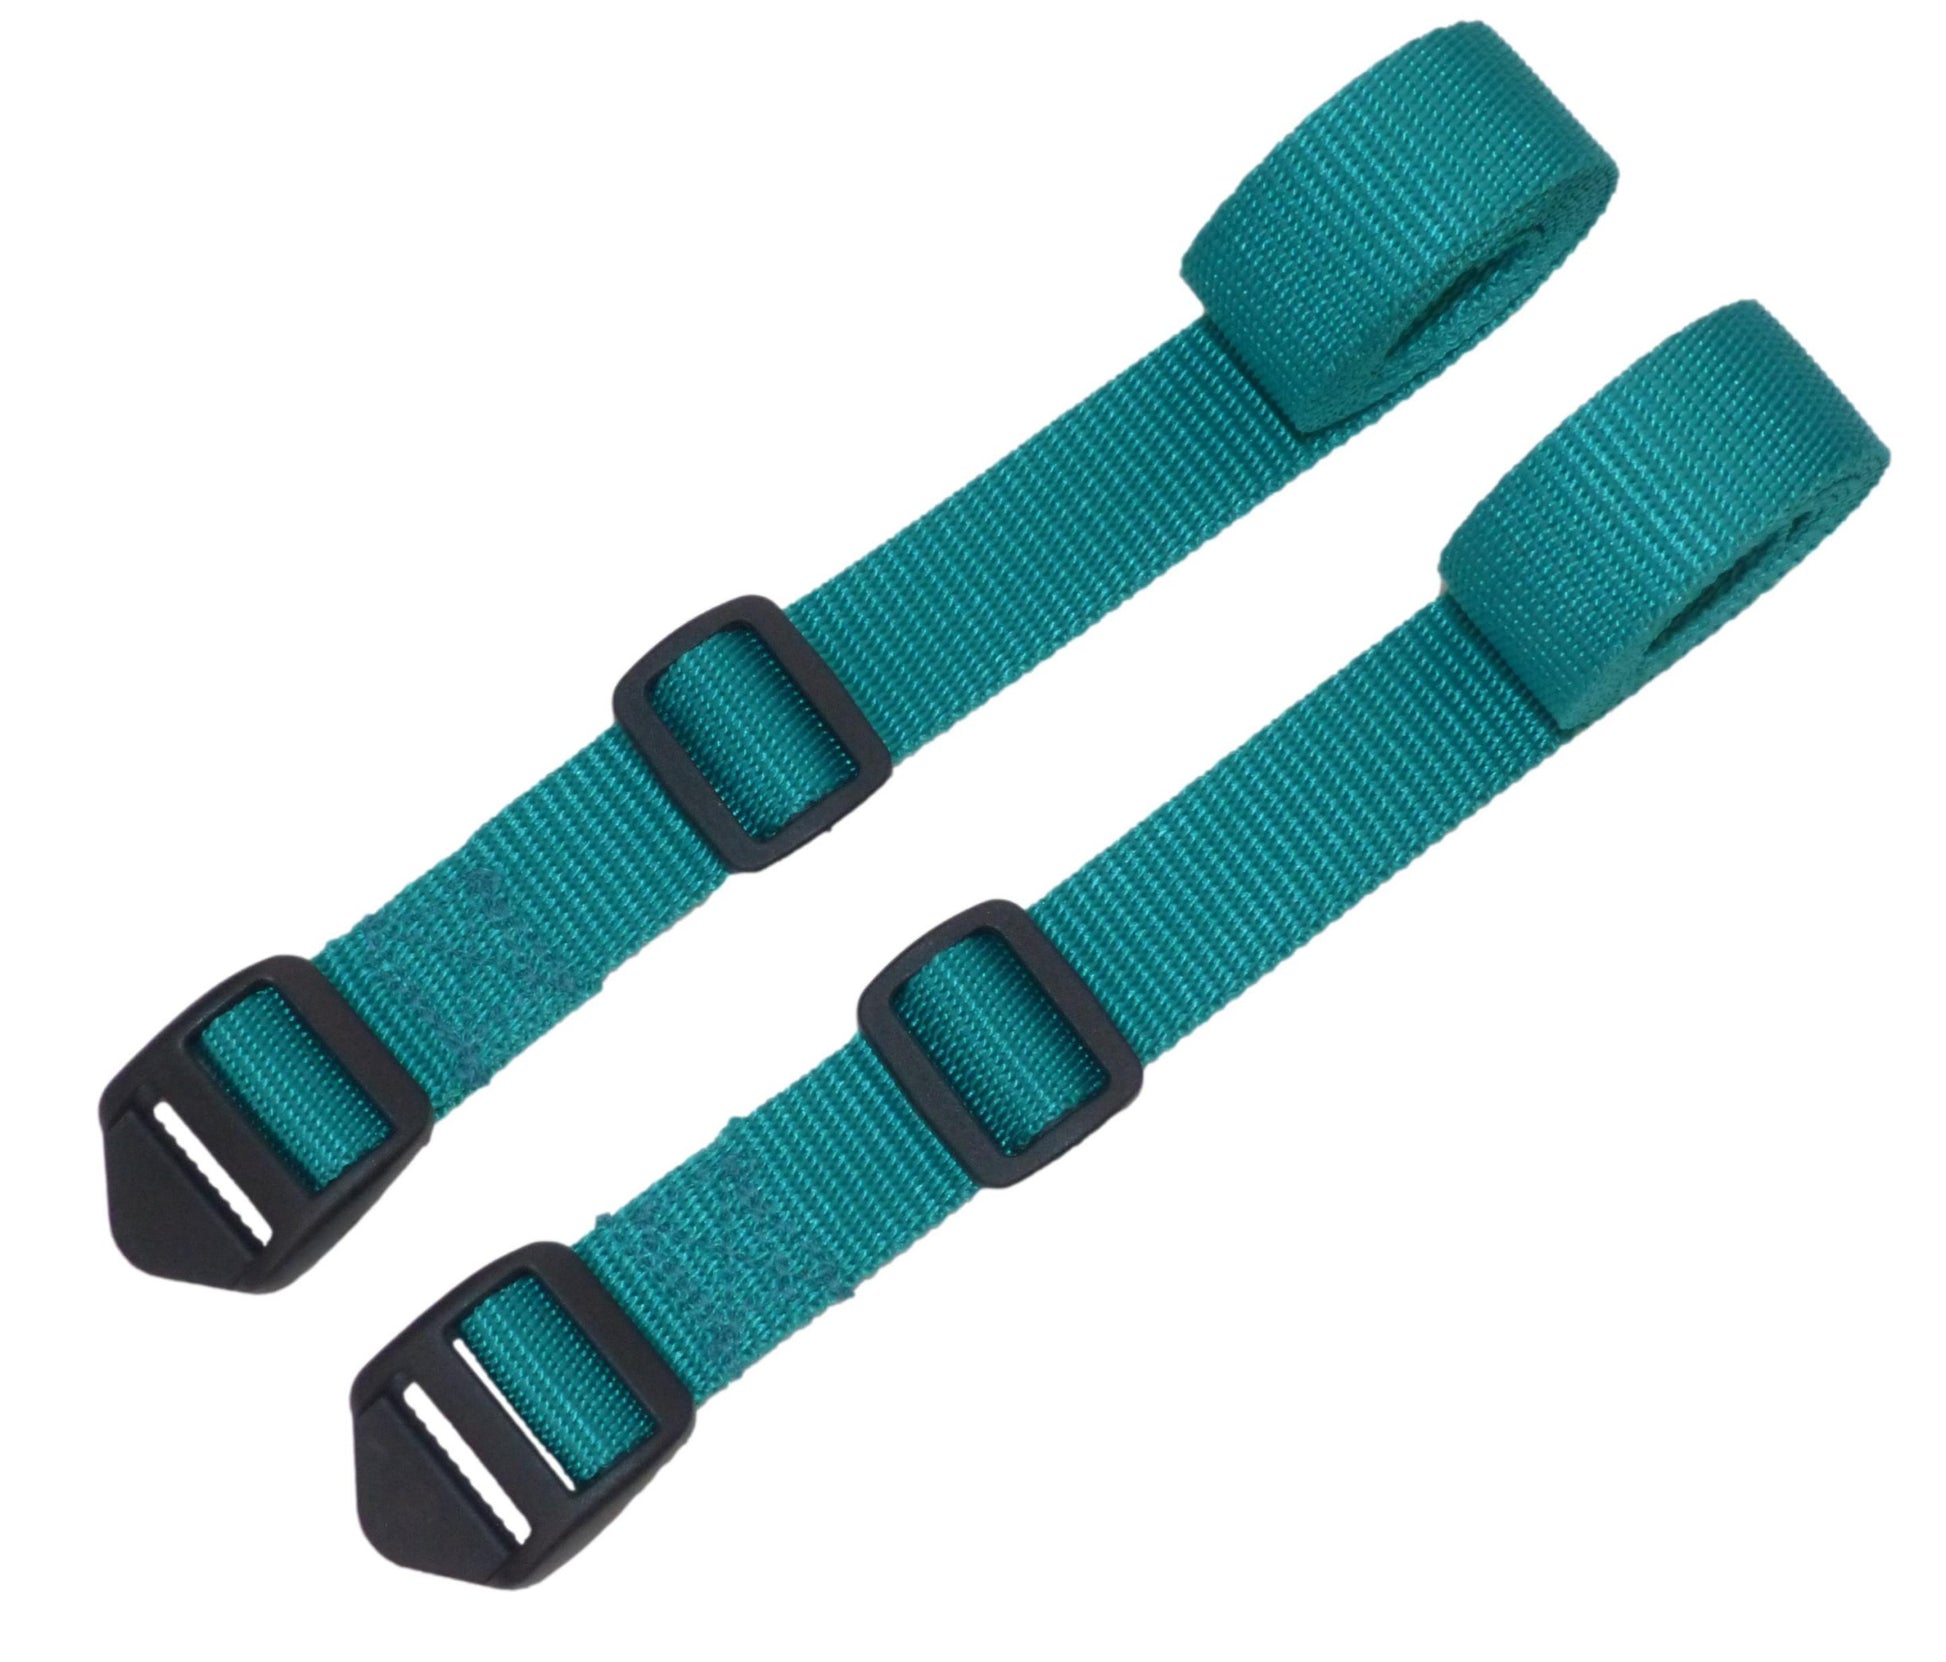 Benristraps 25mm Webbing Strap with Ladderloc Buckle (Pair) in emerald